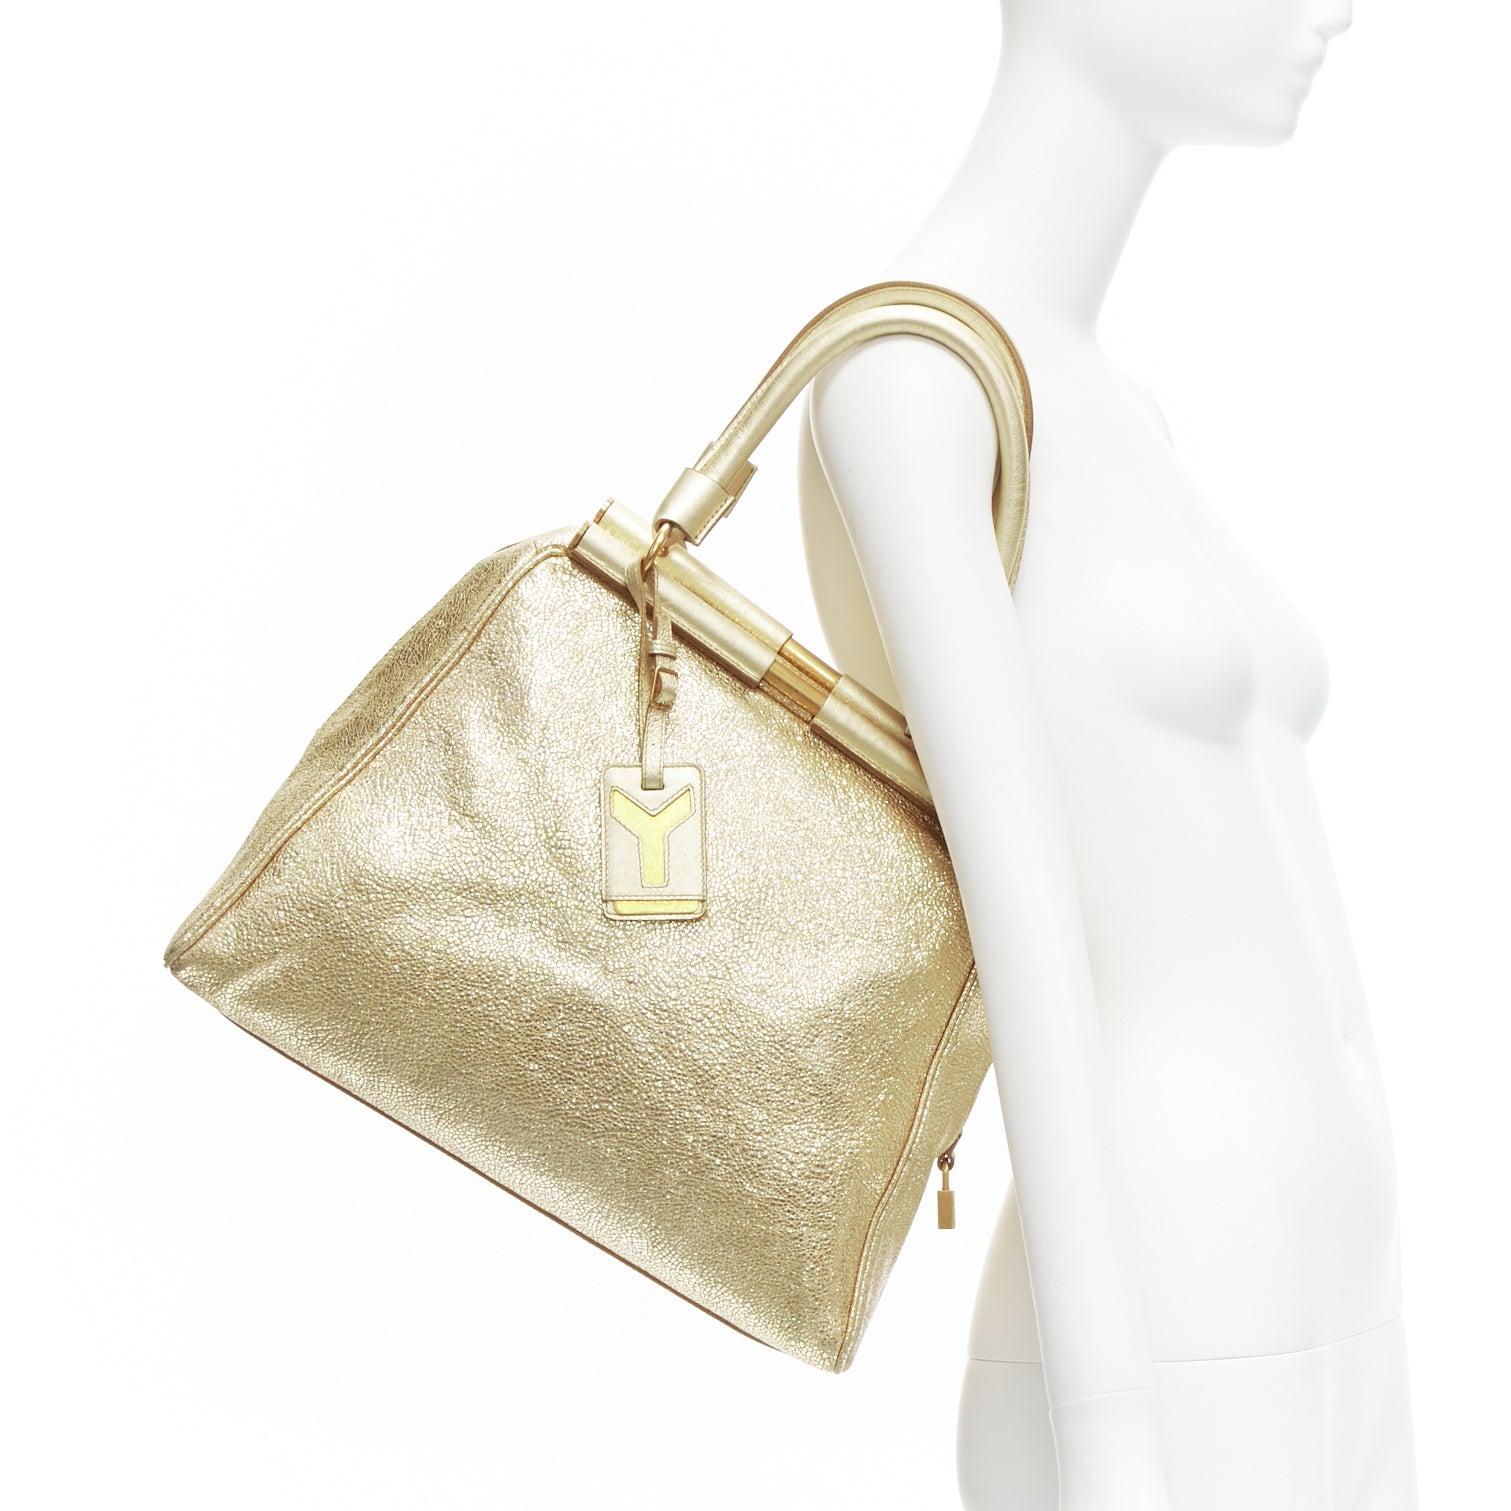 YVES SAINT LAURENT Rive Gauche Majorelle metallic gold medium tote bag
Reference: CELE/A00031
Brand: Yves Saint Laurent
Model: Majorelle
Collection: Rive Gauche
Material: Leather
Color: Gold
Pattern: Solid
Closure: Zip
Lining: Brown Fabric
Extra